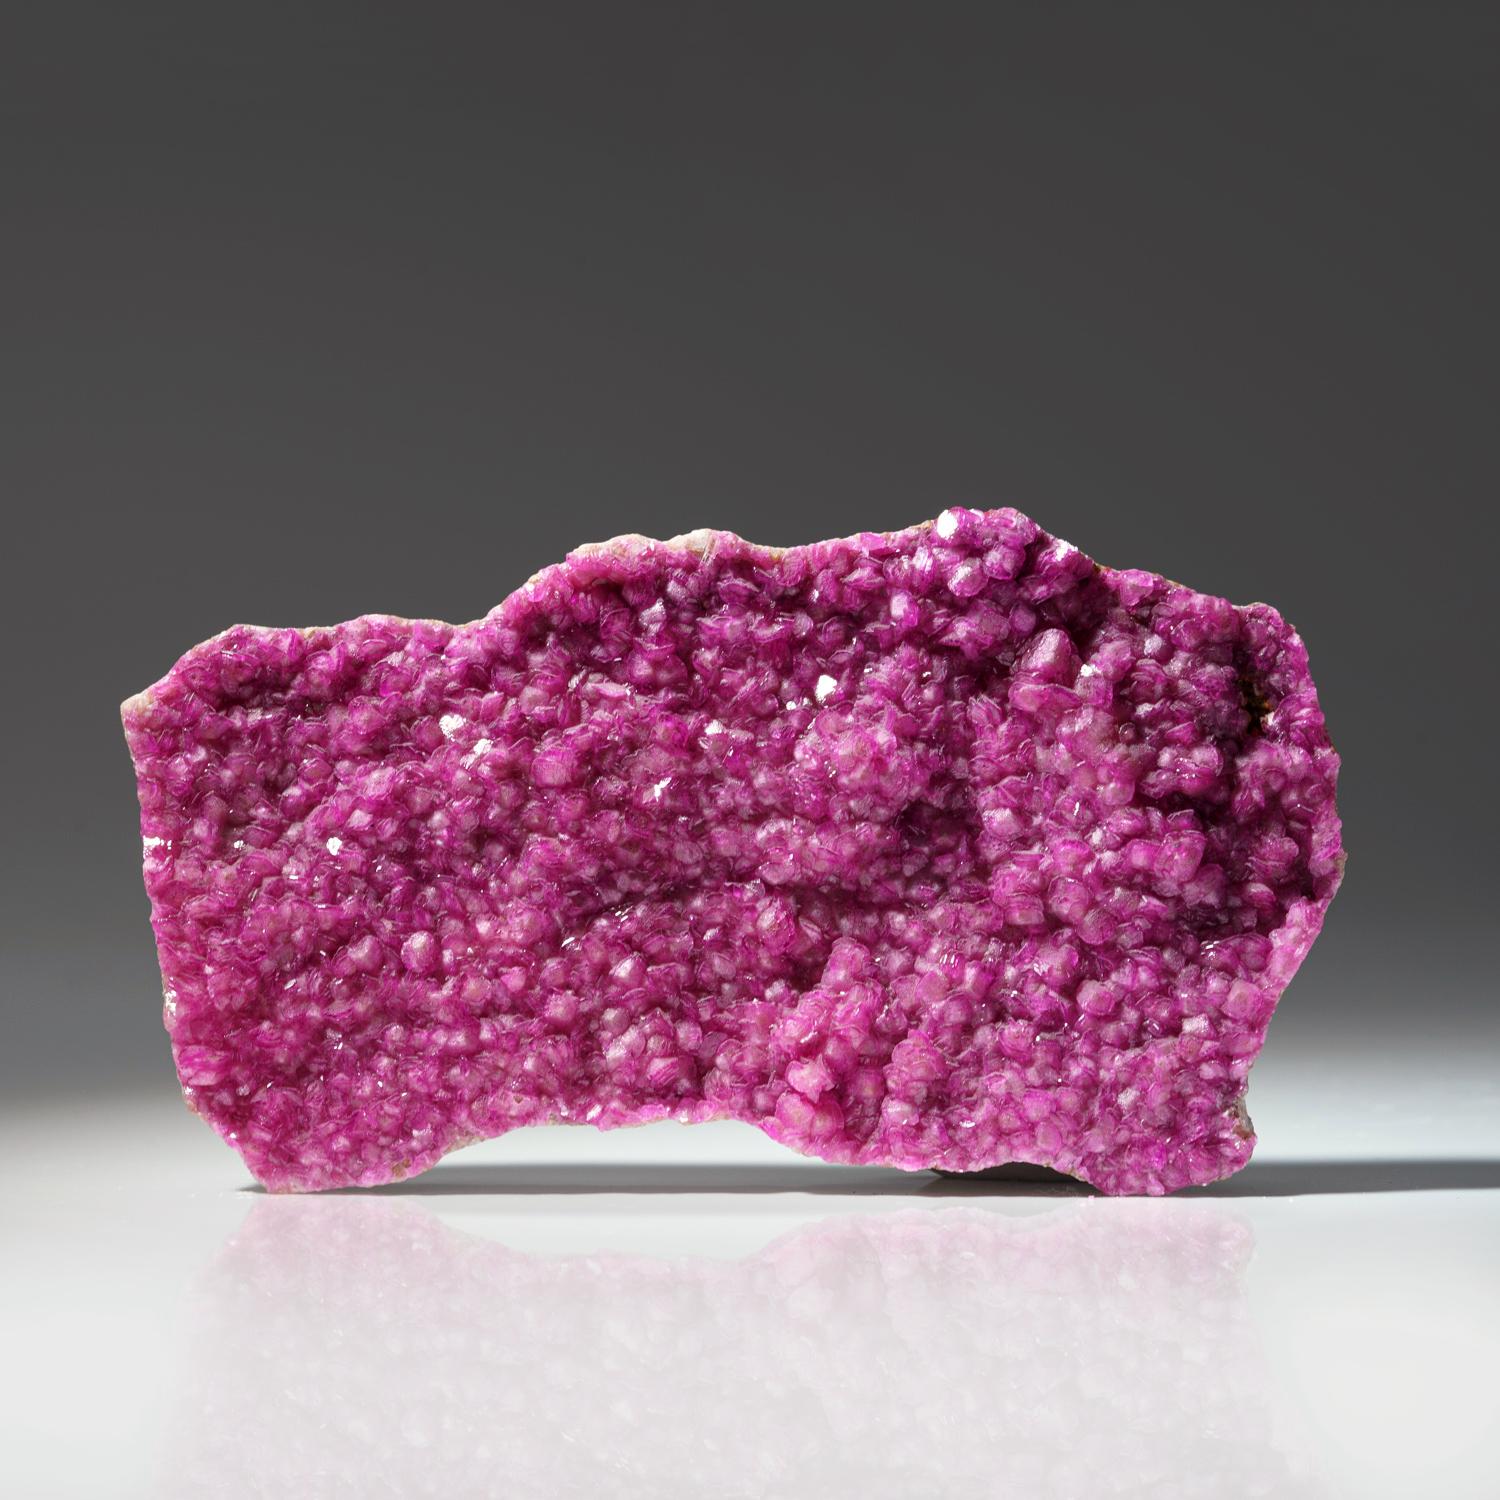 From Mashamba West, Kolwezi, Western area, Shaba Cu belt, Shaba (Katanga), Congo (Zaire)

Large complex cluster of lustrous pink translucent flattened rhombohedral cobalt-rich Calcite crystals on matrix. Has bright intense color with scintillating